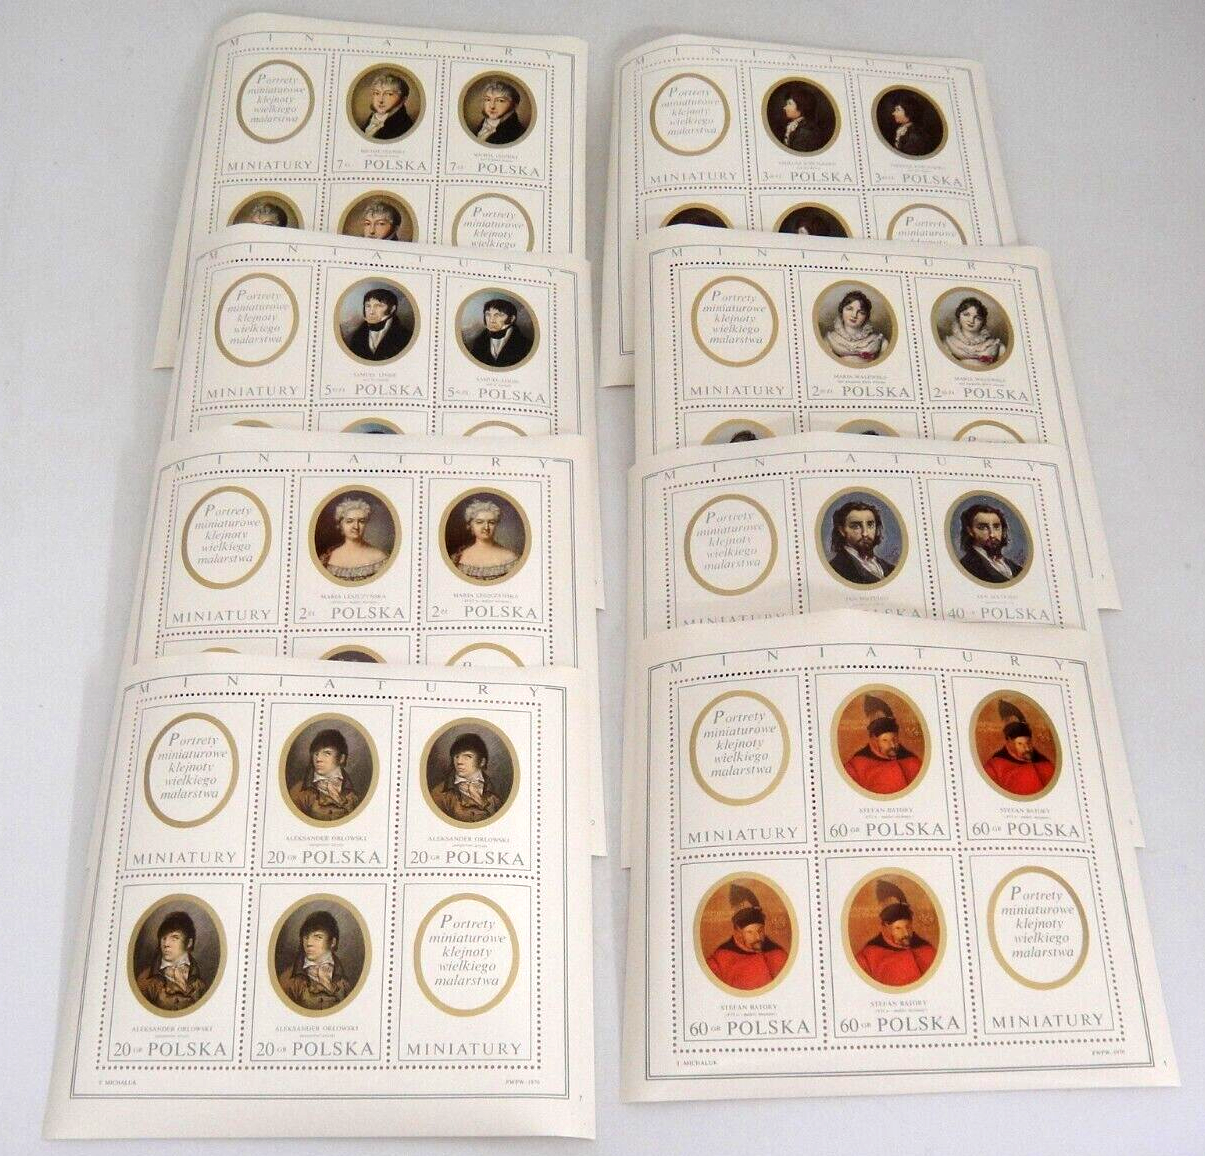 Primary image for Poland Stamps 1970 Art Portraits #1748-55 8 Sheets Complete Miniatures